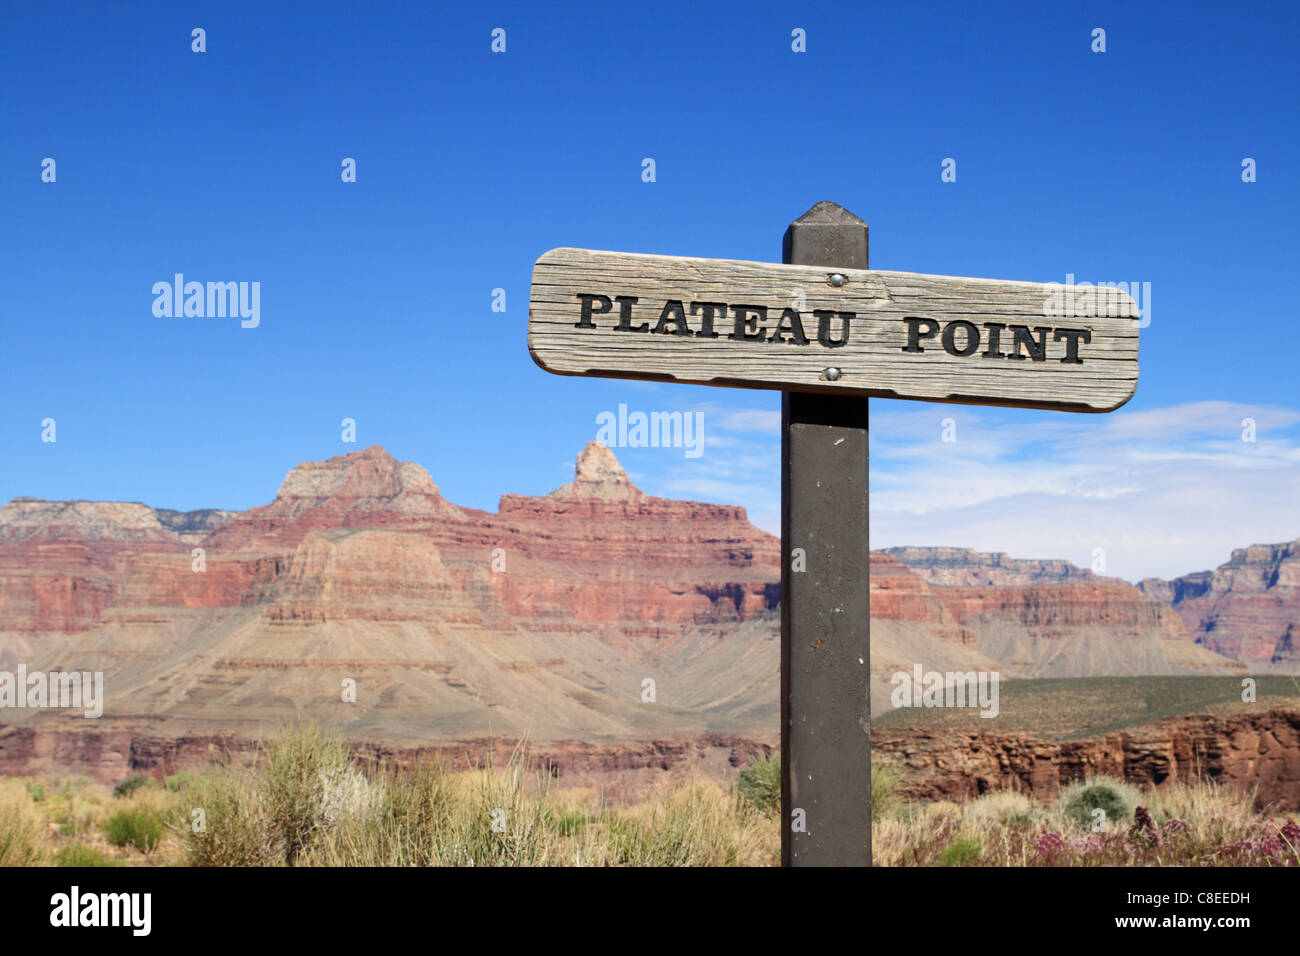 Plateau Point trail sign in the Grand Canyon Stock Photo